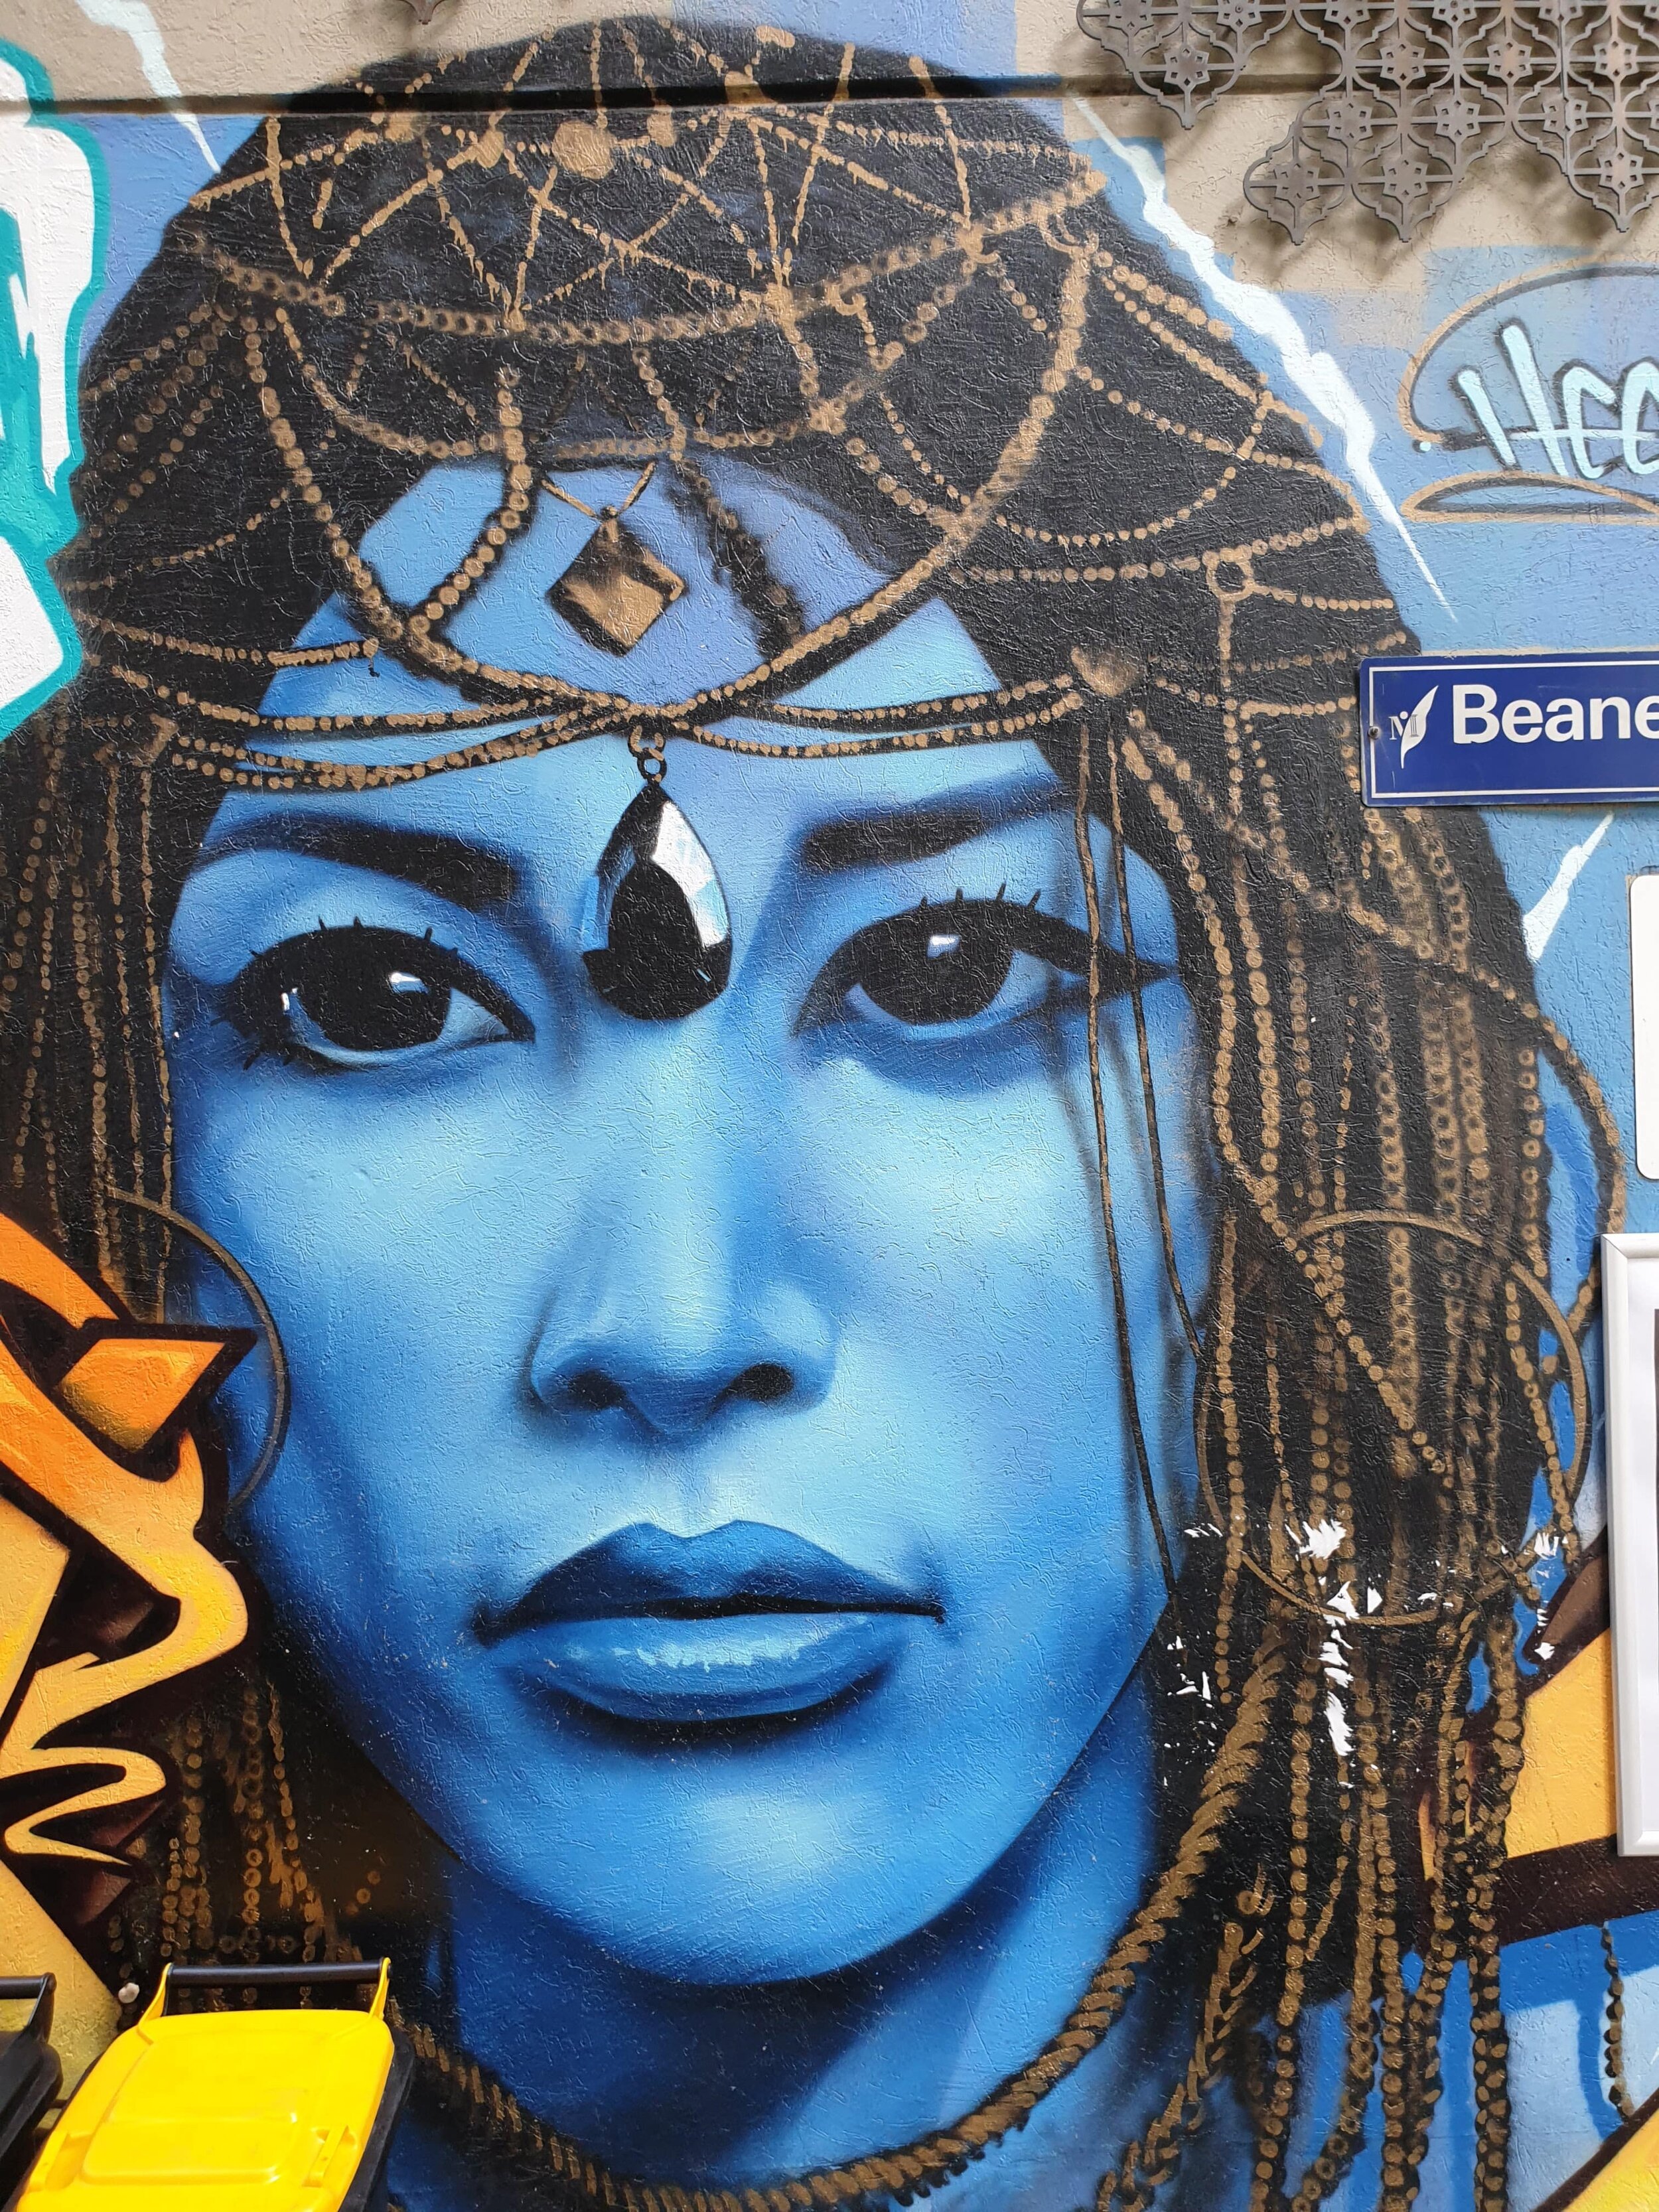 Melbourne street art self-guided tour: the best laneways, street art and arcades 